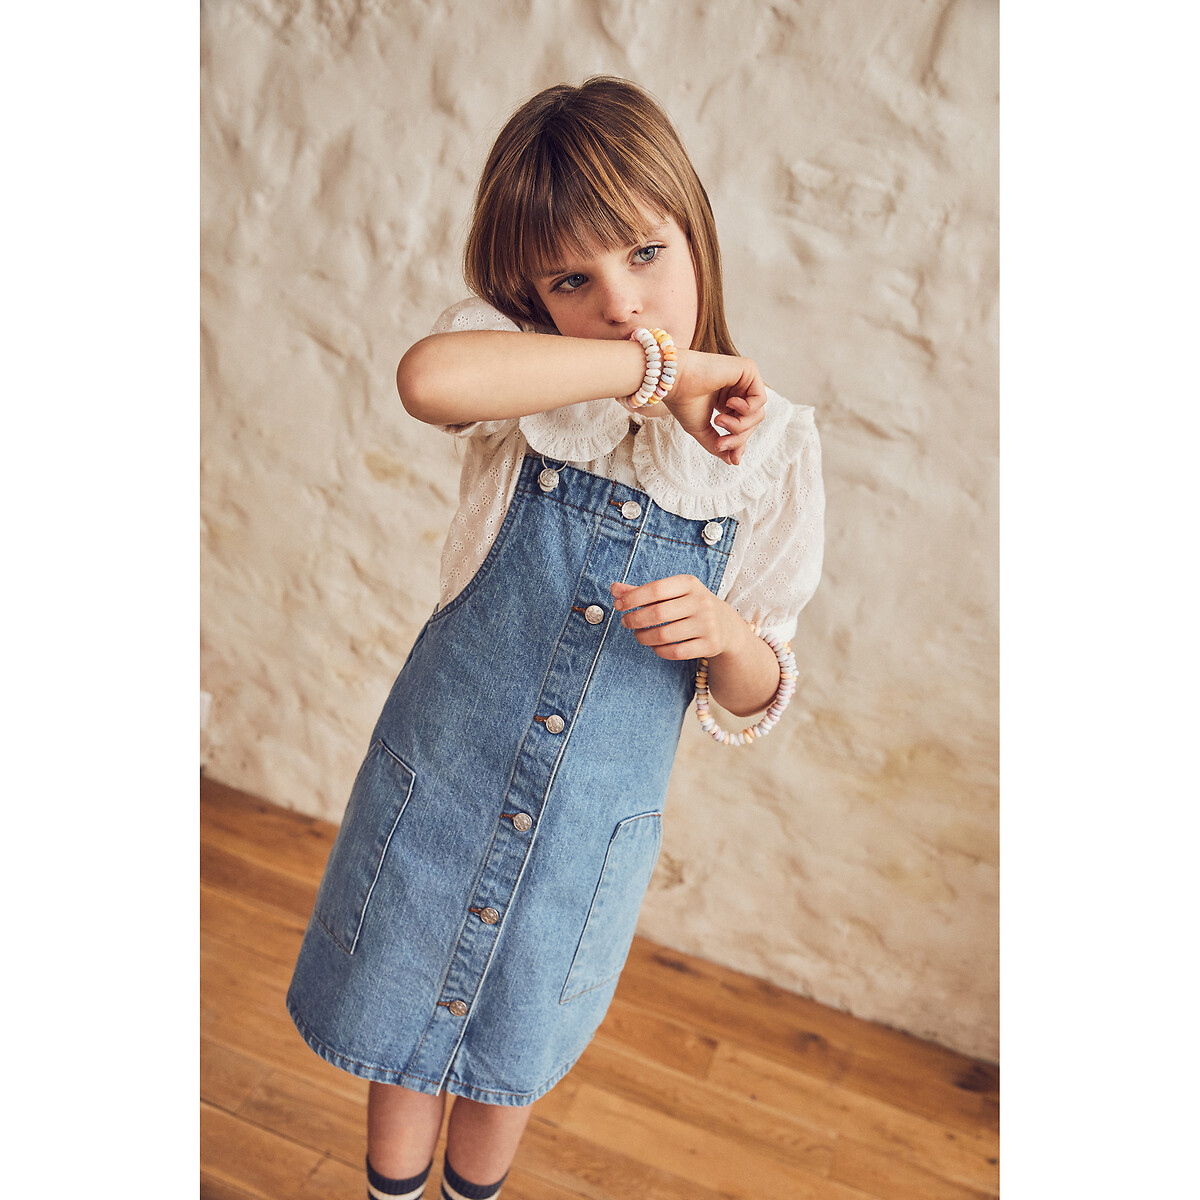 Tiffosi jumpsuit KIDS FASHION Baby Jumpsuits & Dungarees Print Blue 5Y discount 89% 